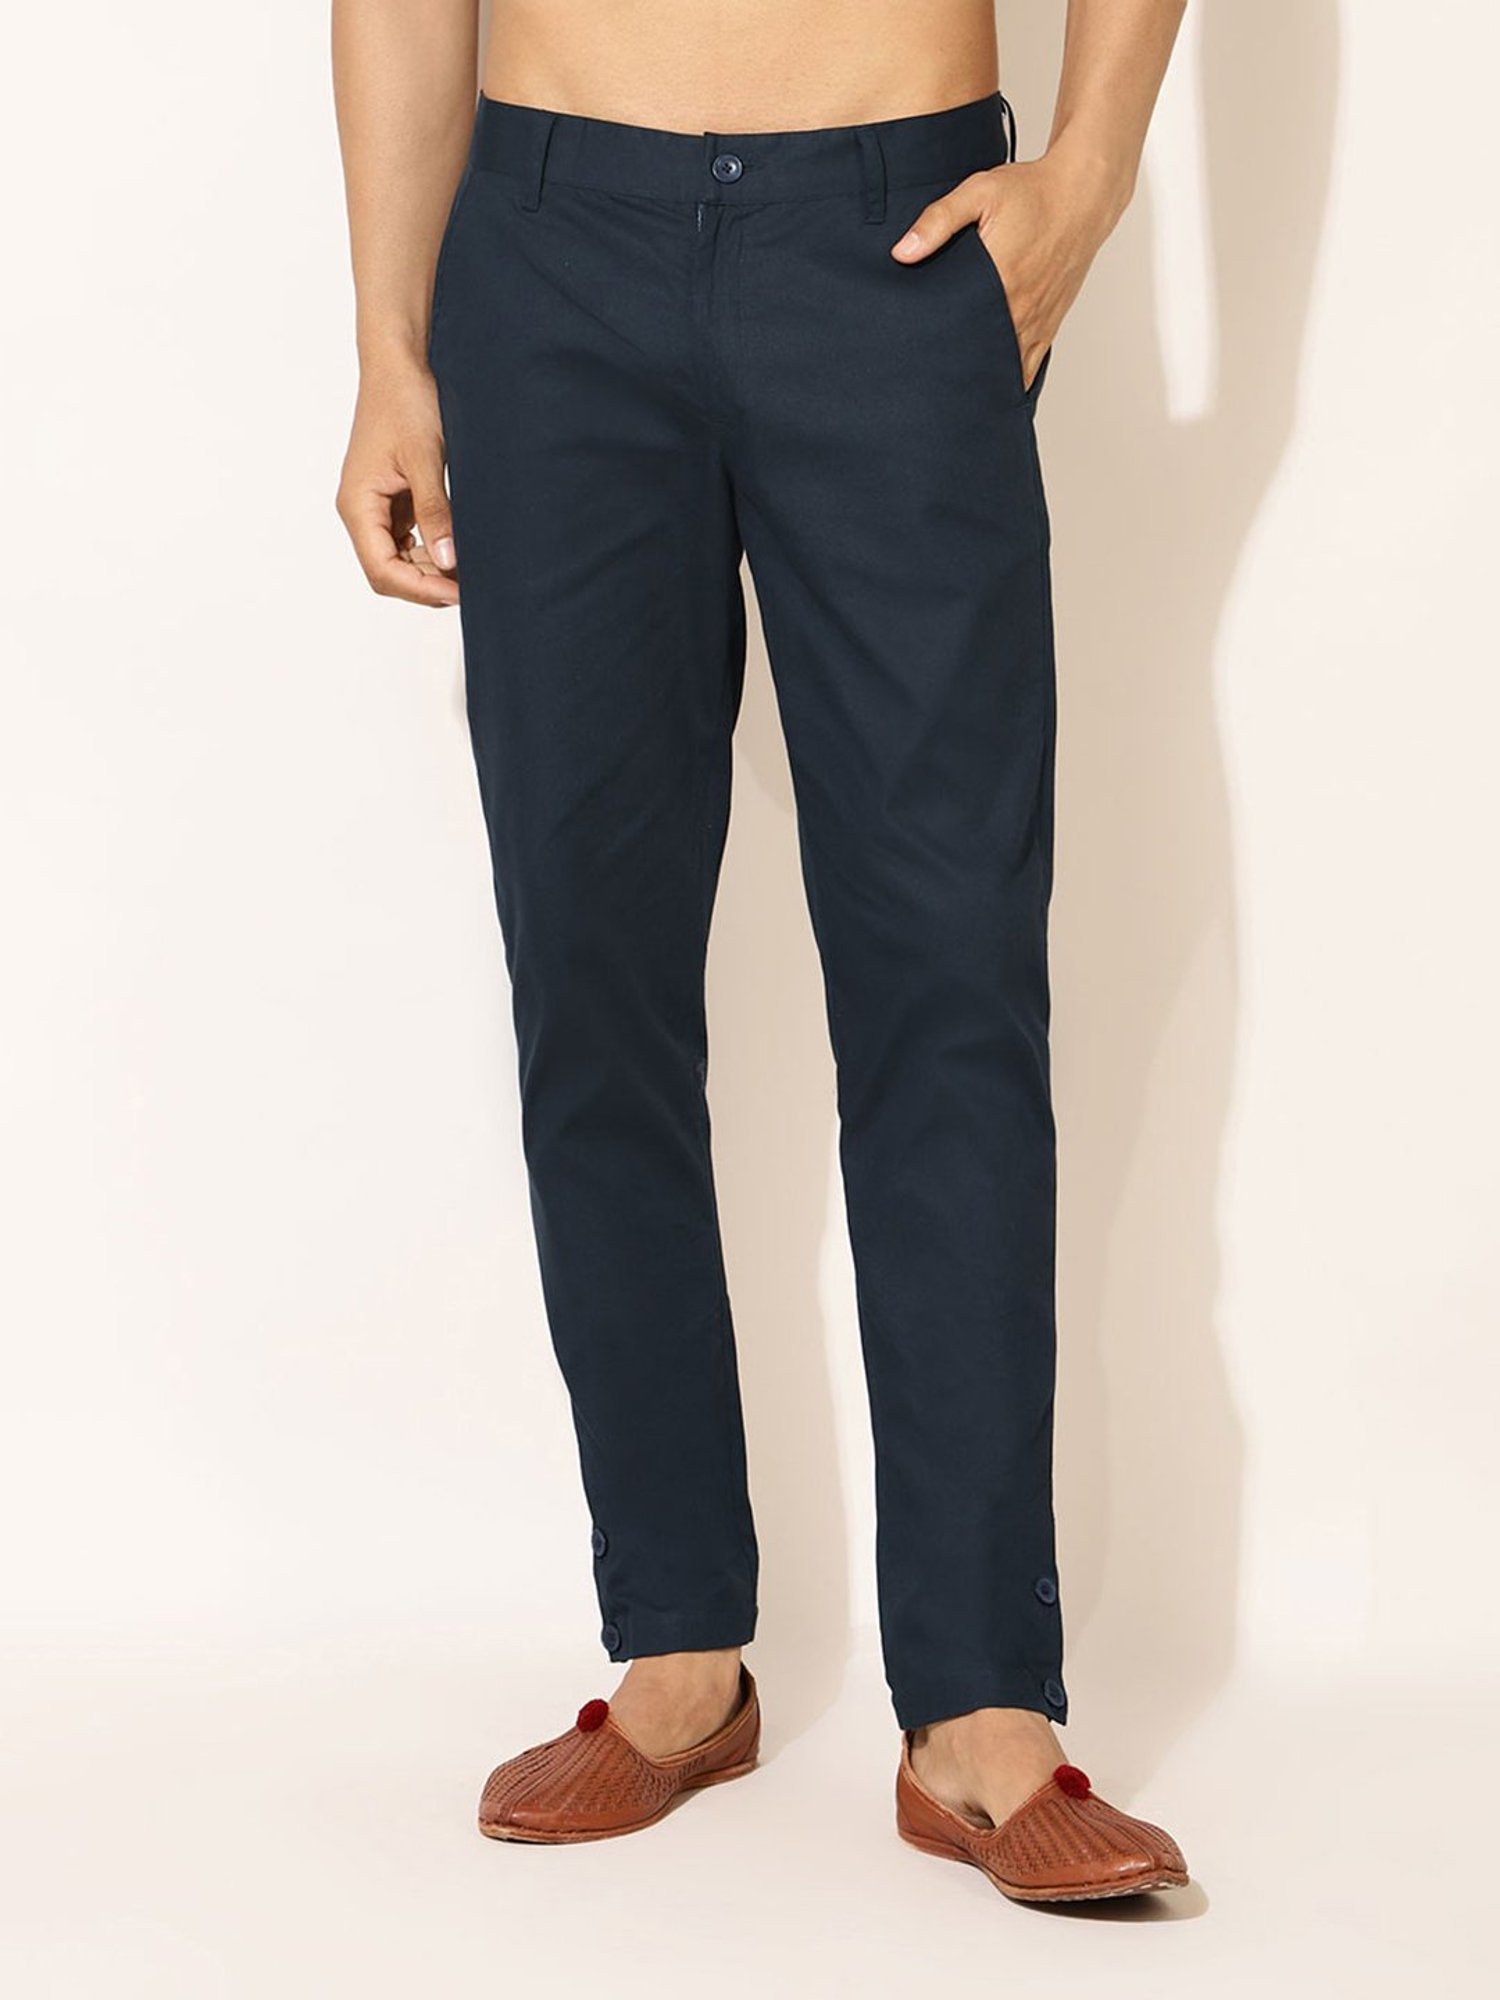 Fabindia Light Grey Comfort Fit Flat Front Trousers